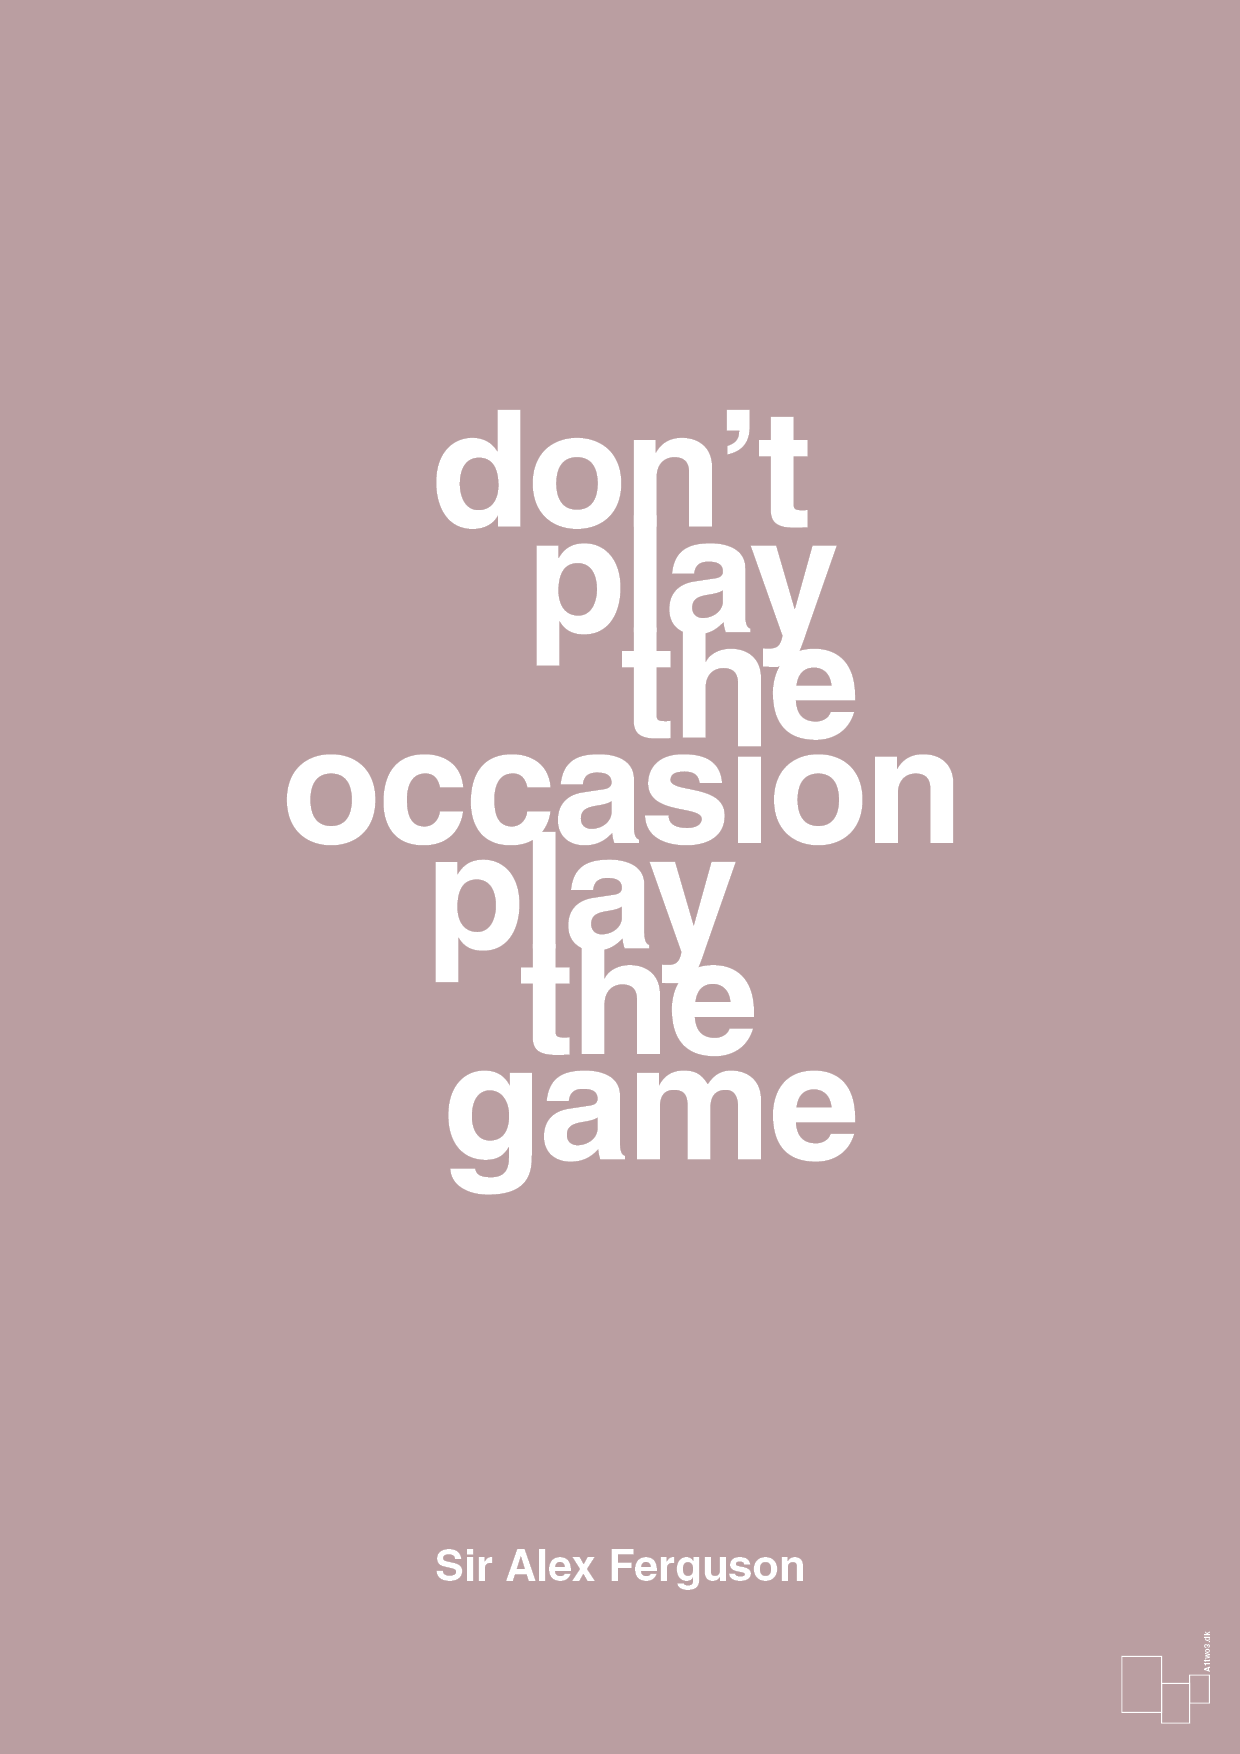 don’t play the occasion play the game - Plakat med Citater i Light Rose